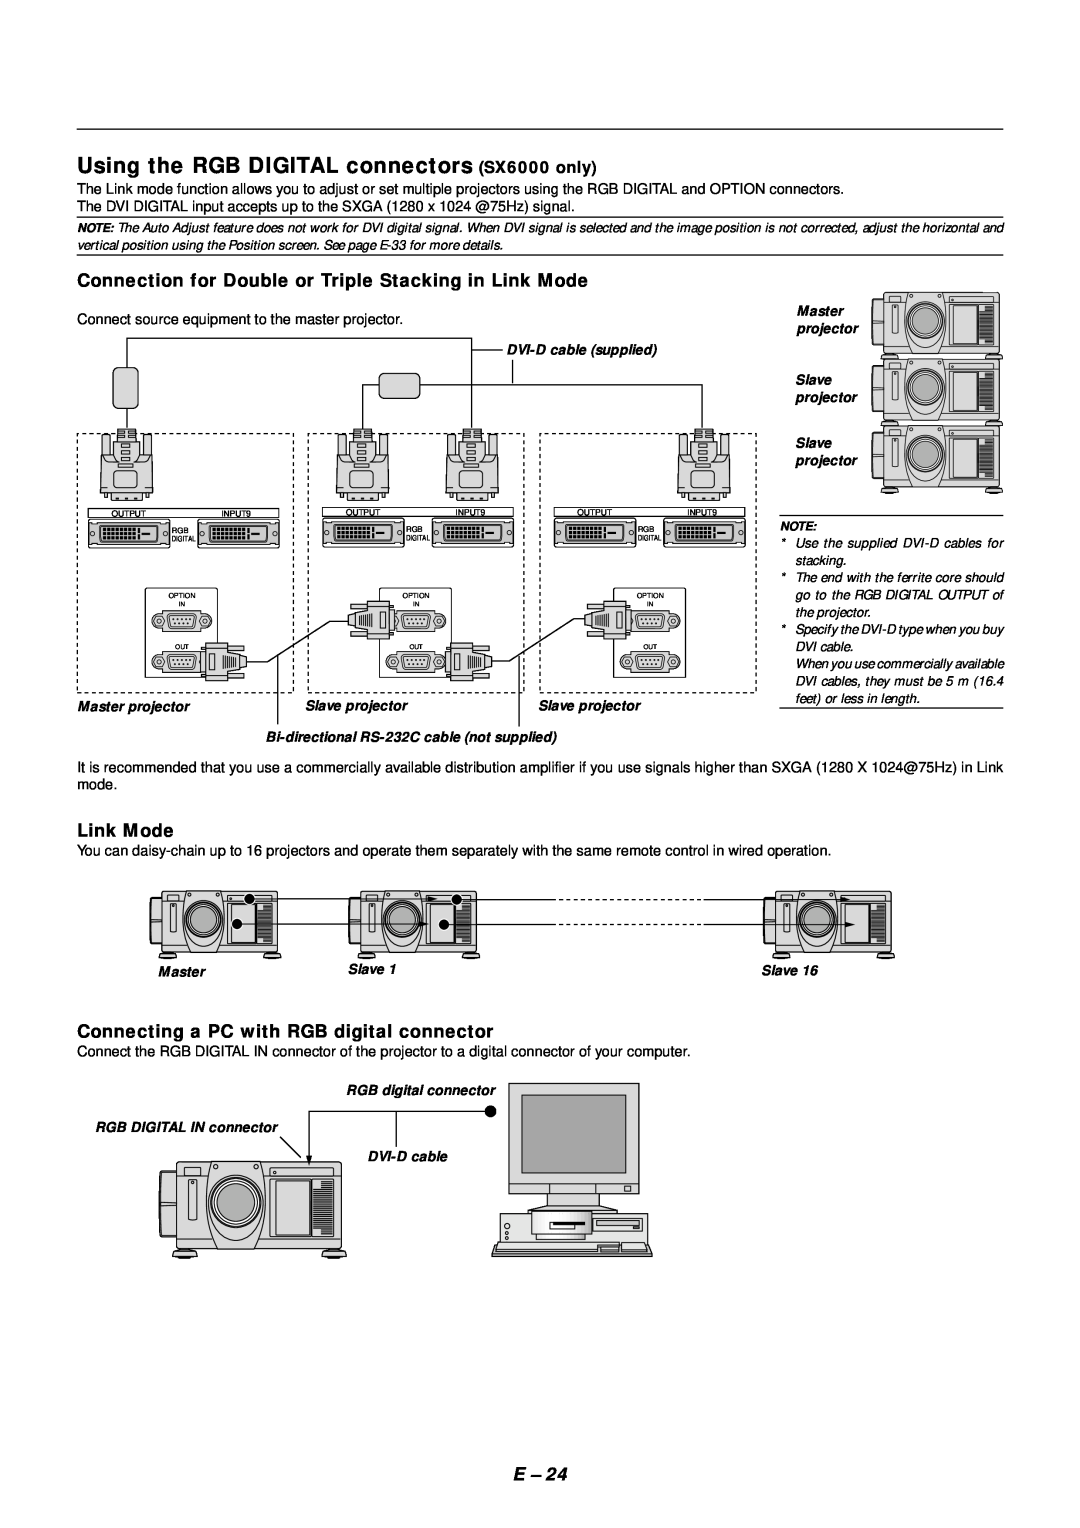 NEC SX4000 user manual Using the RGB DIGITAL connectors SX6000 only, Connection for Double or Triple Stacking in Link Mode 